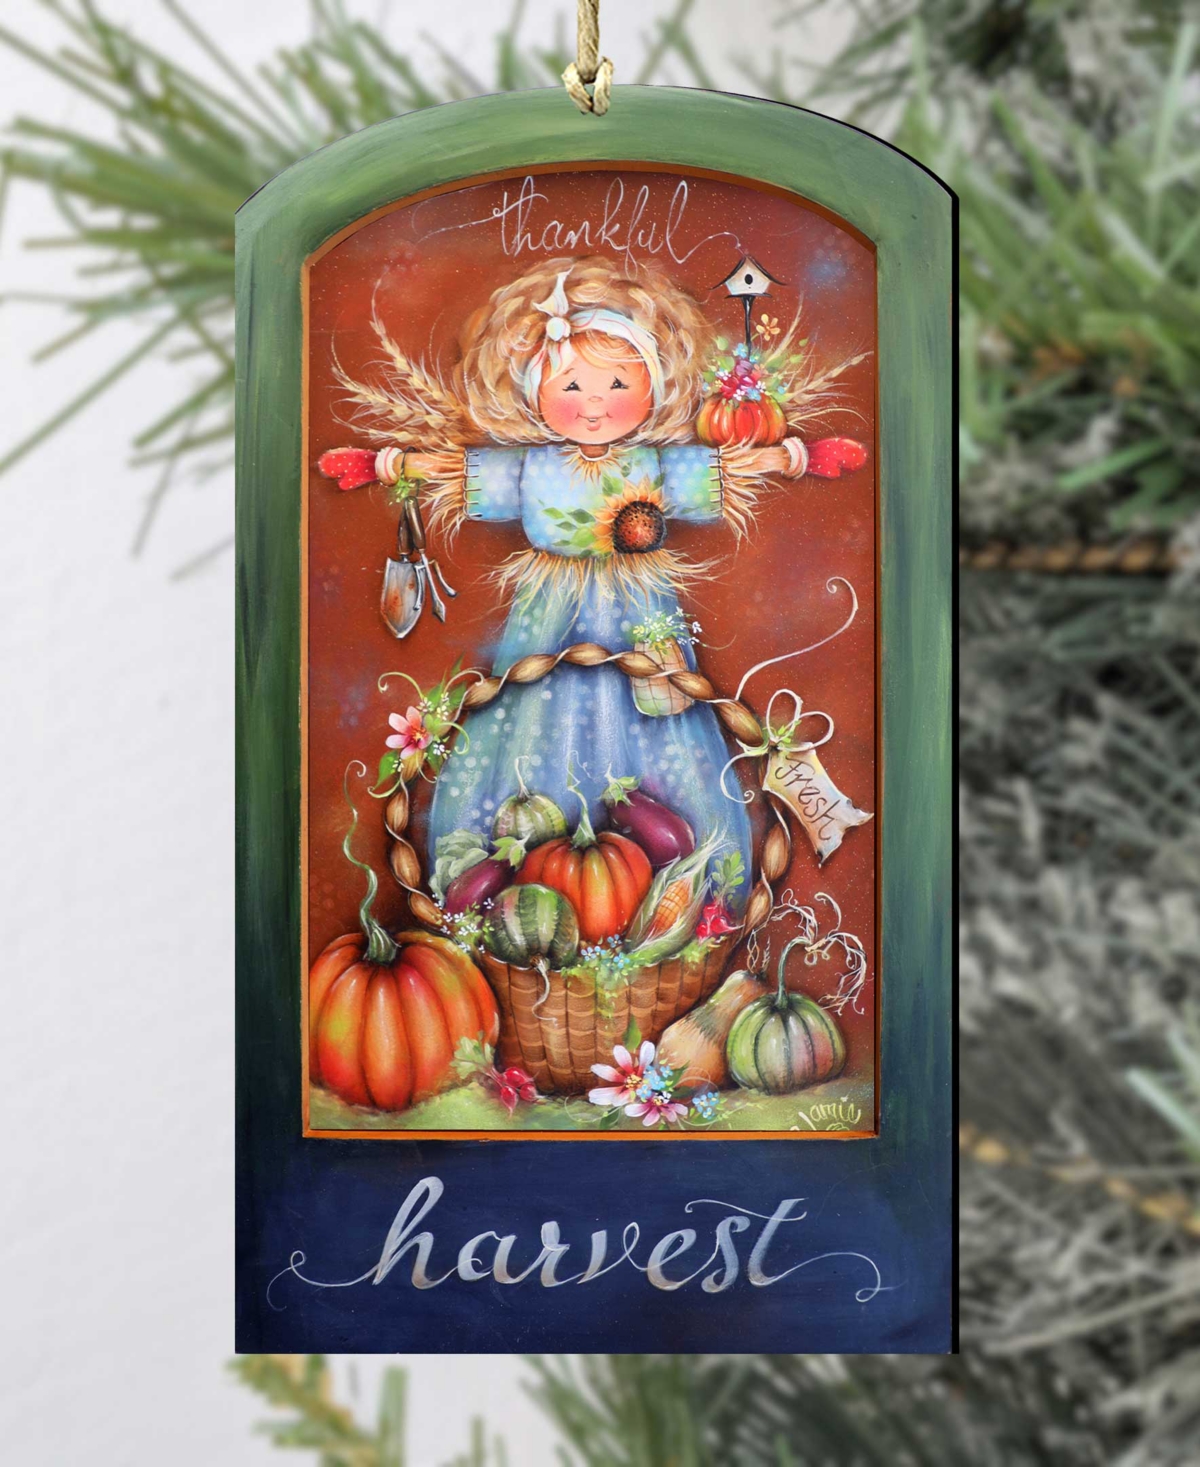 Shop Designocracy Holiday Wooden Ornaments Thankful Harvest Home Decor J. Mills-price In Multi Color